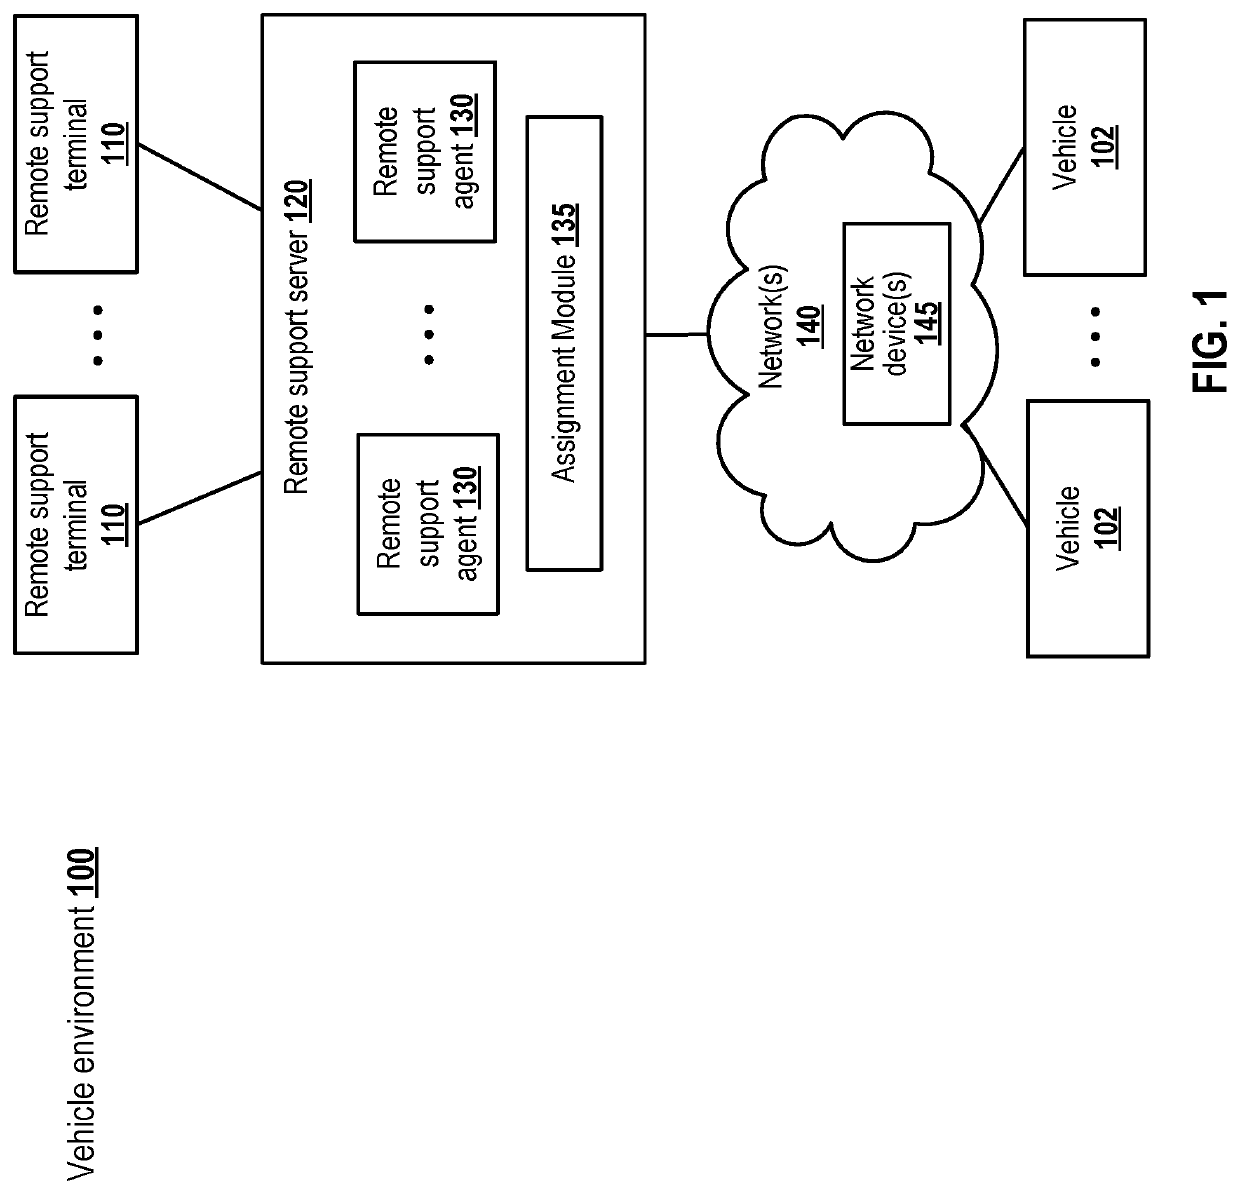 Mapping of intelligent transport systems to remote support agents